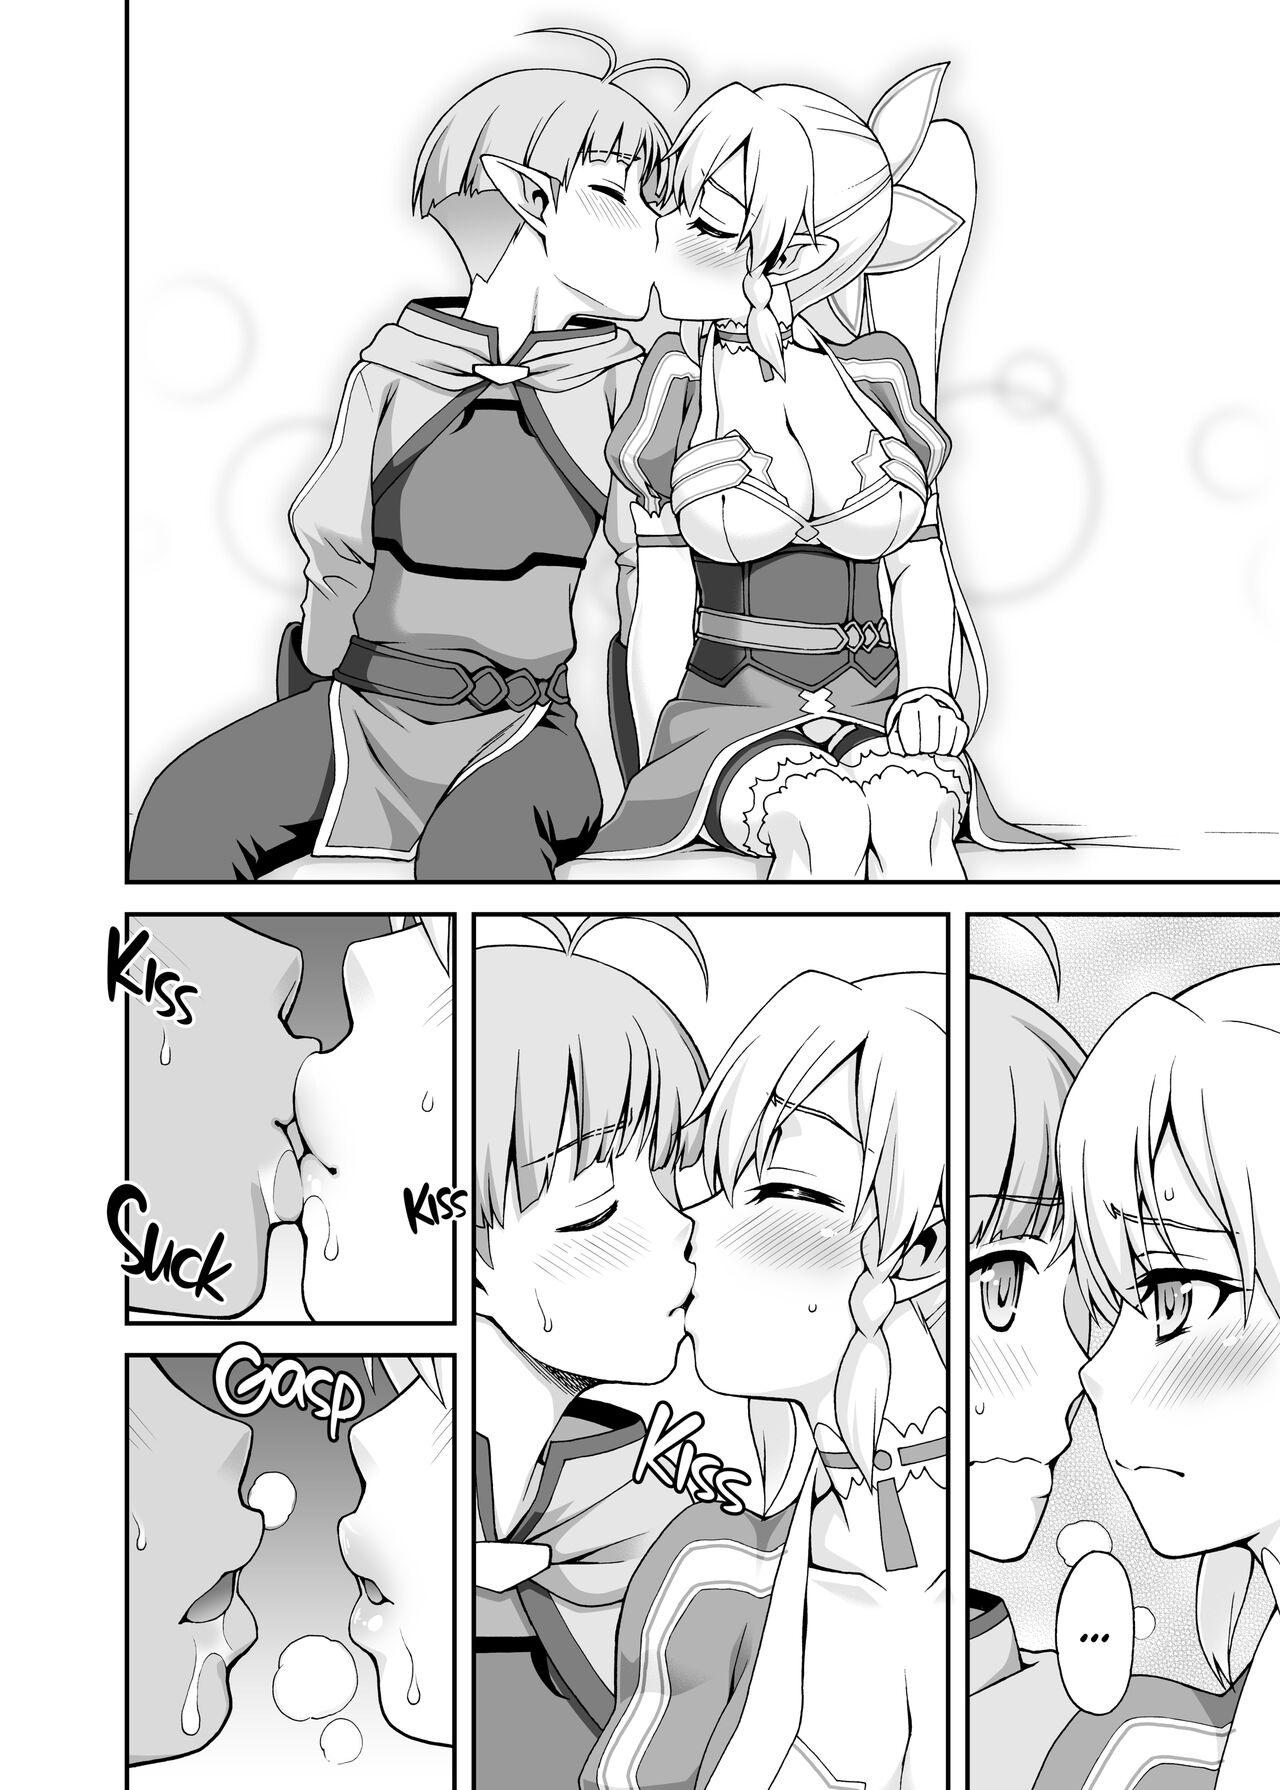 Throatfuck Delphinium Madonna 2 - Sword art online Family Roleplay - Page 11